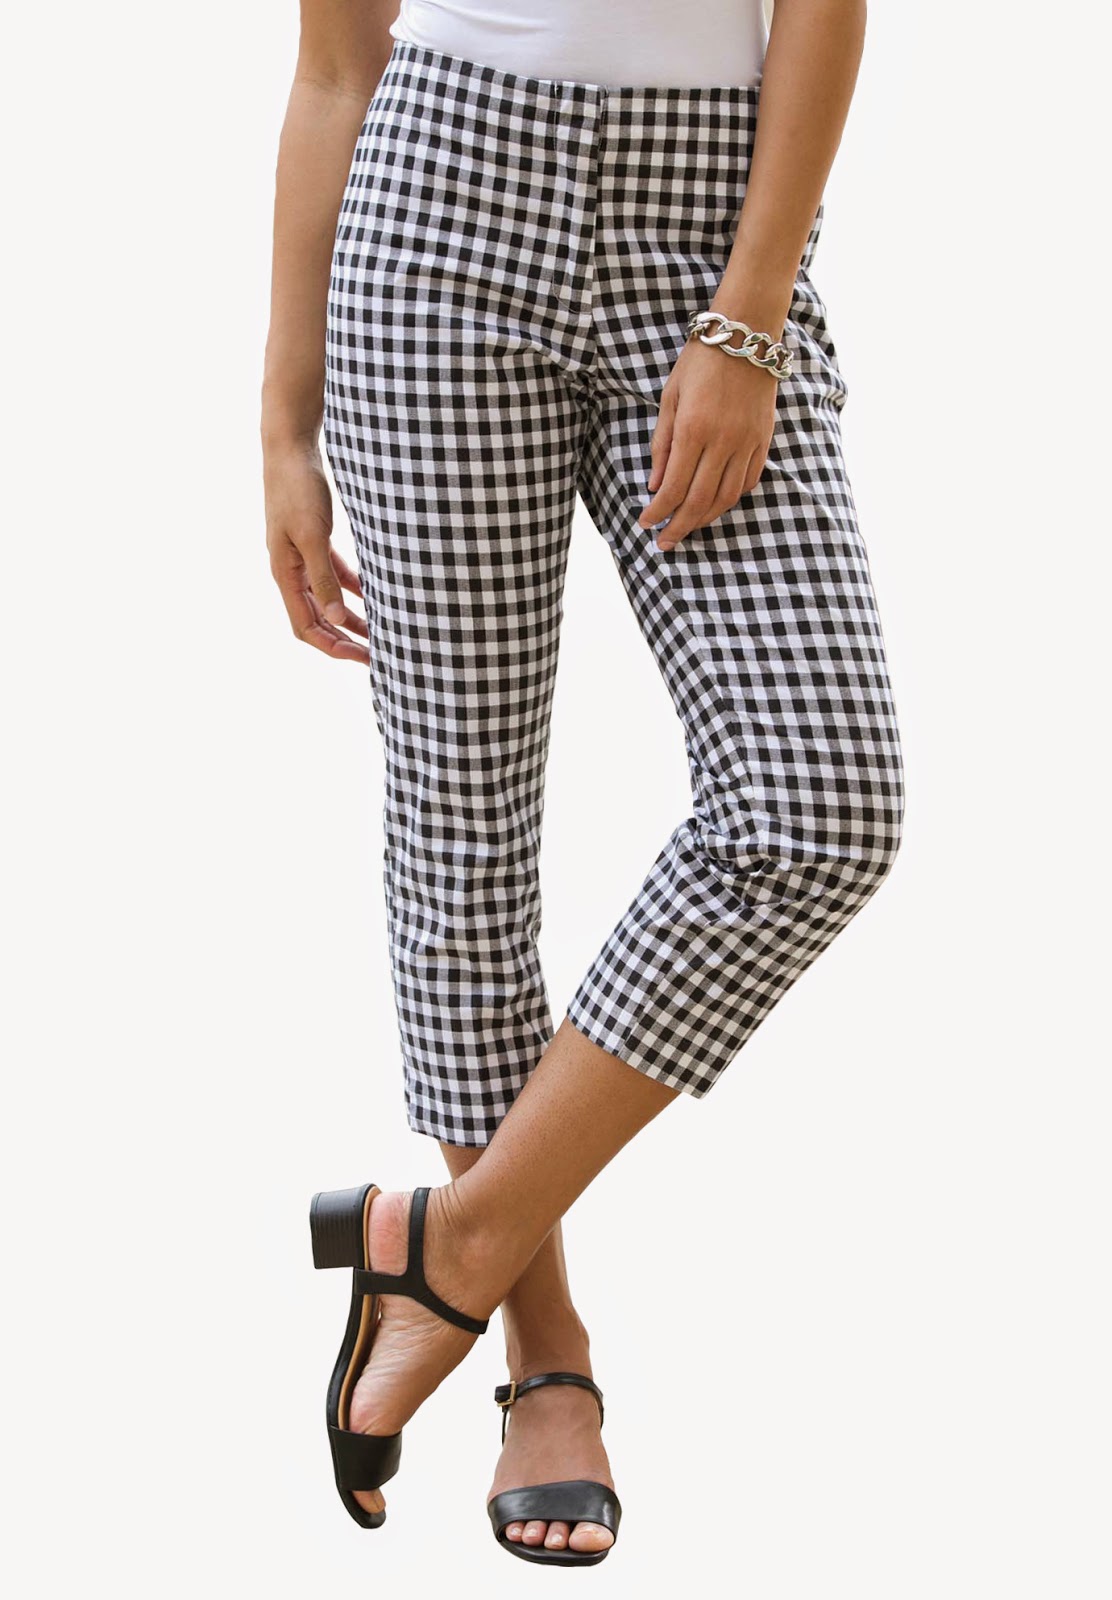 Rez to the City: SUMMER TREND: GINGHAM